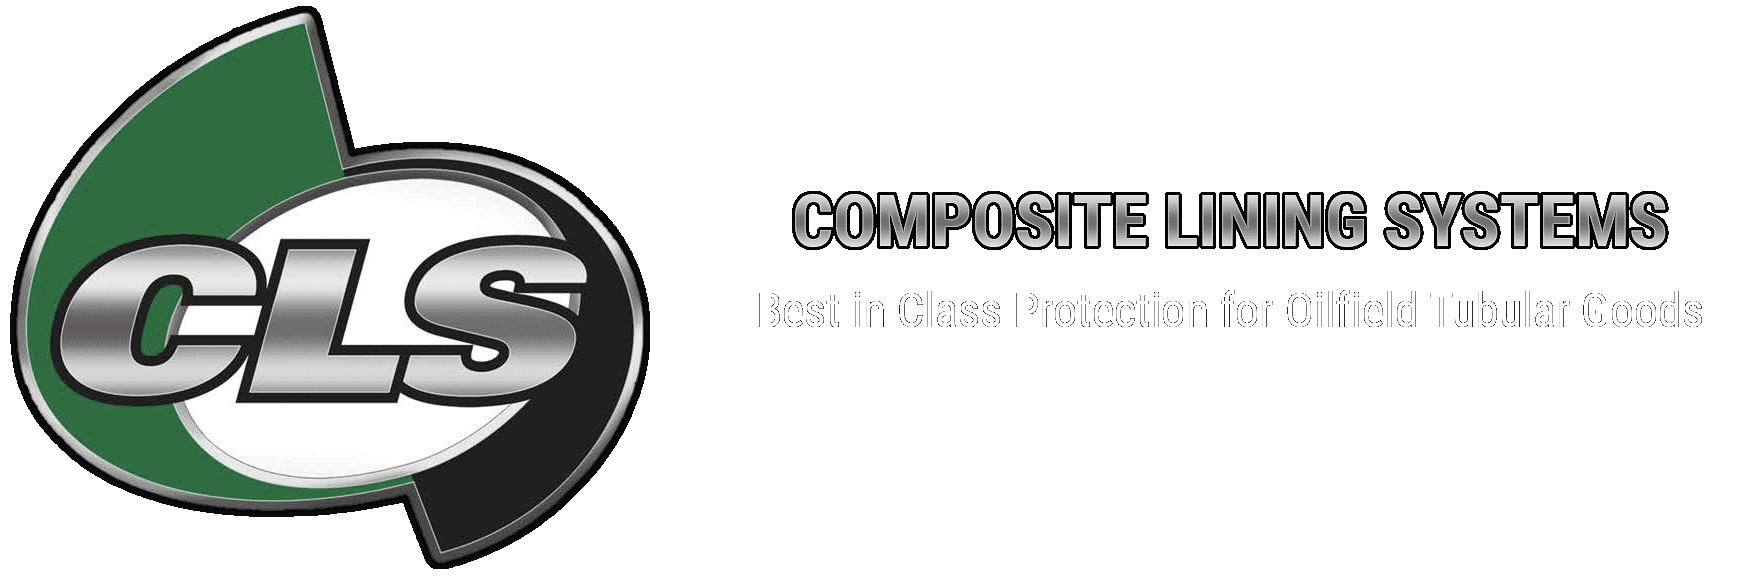 Composite Lining Systems - Best-in-class protection for oilfield tubular goods